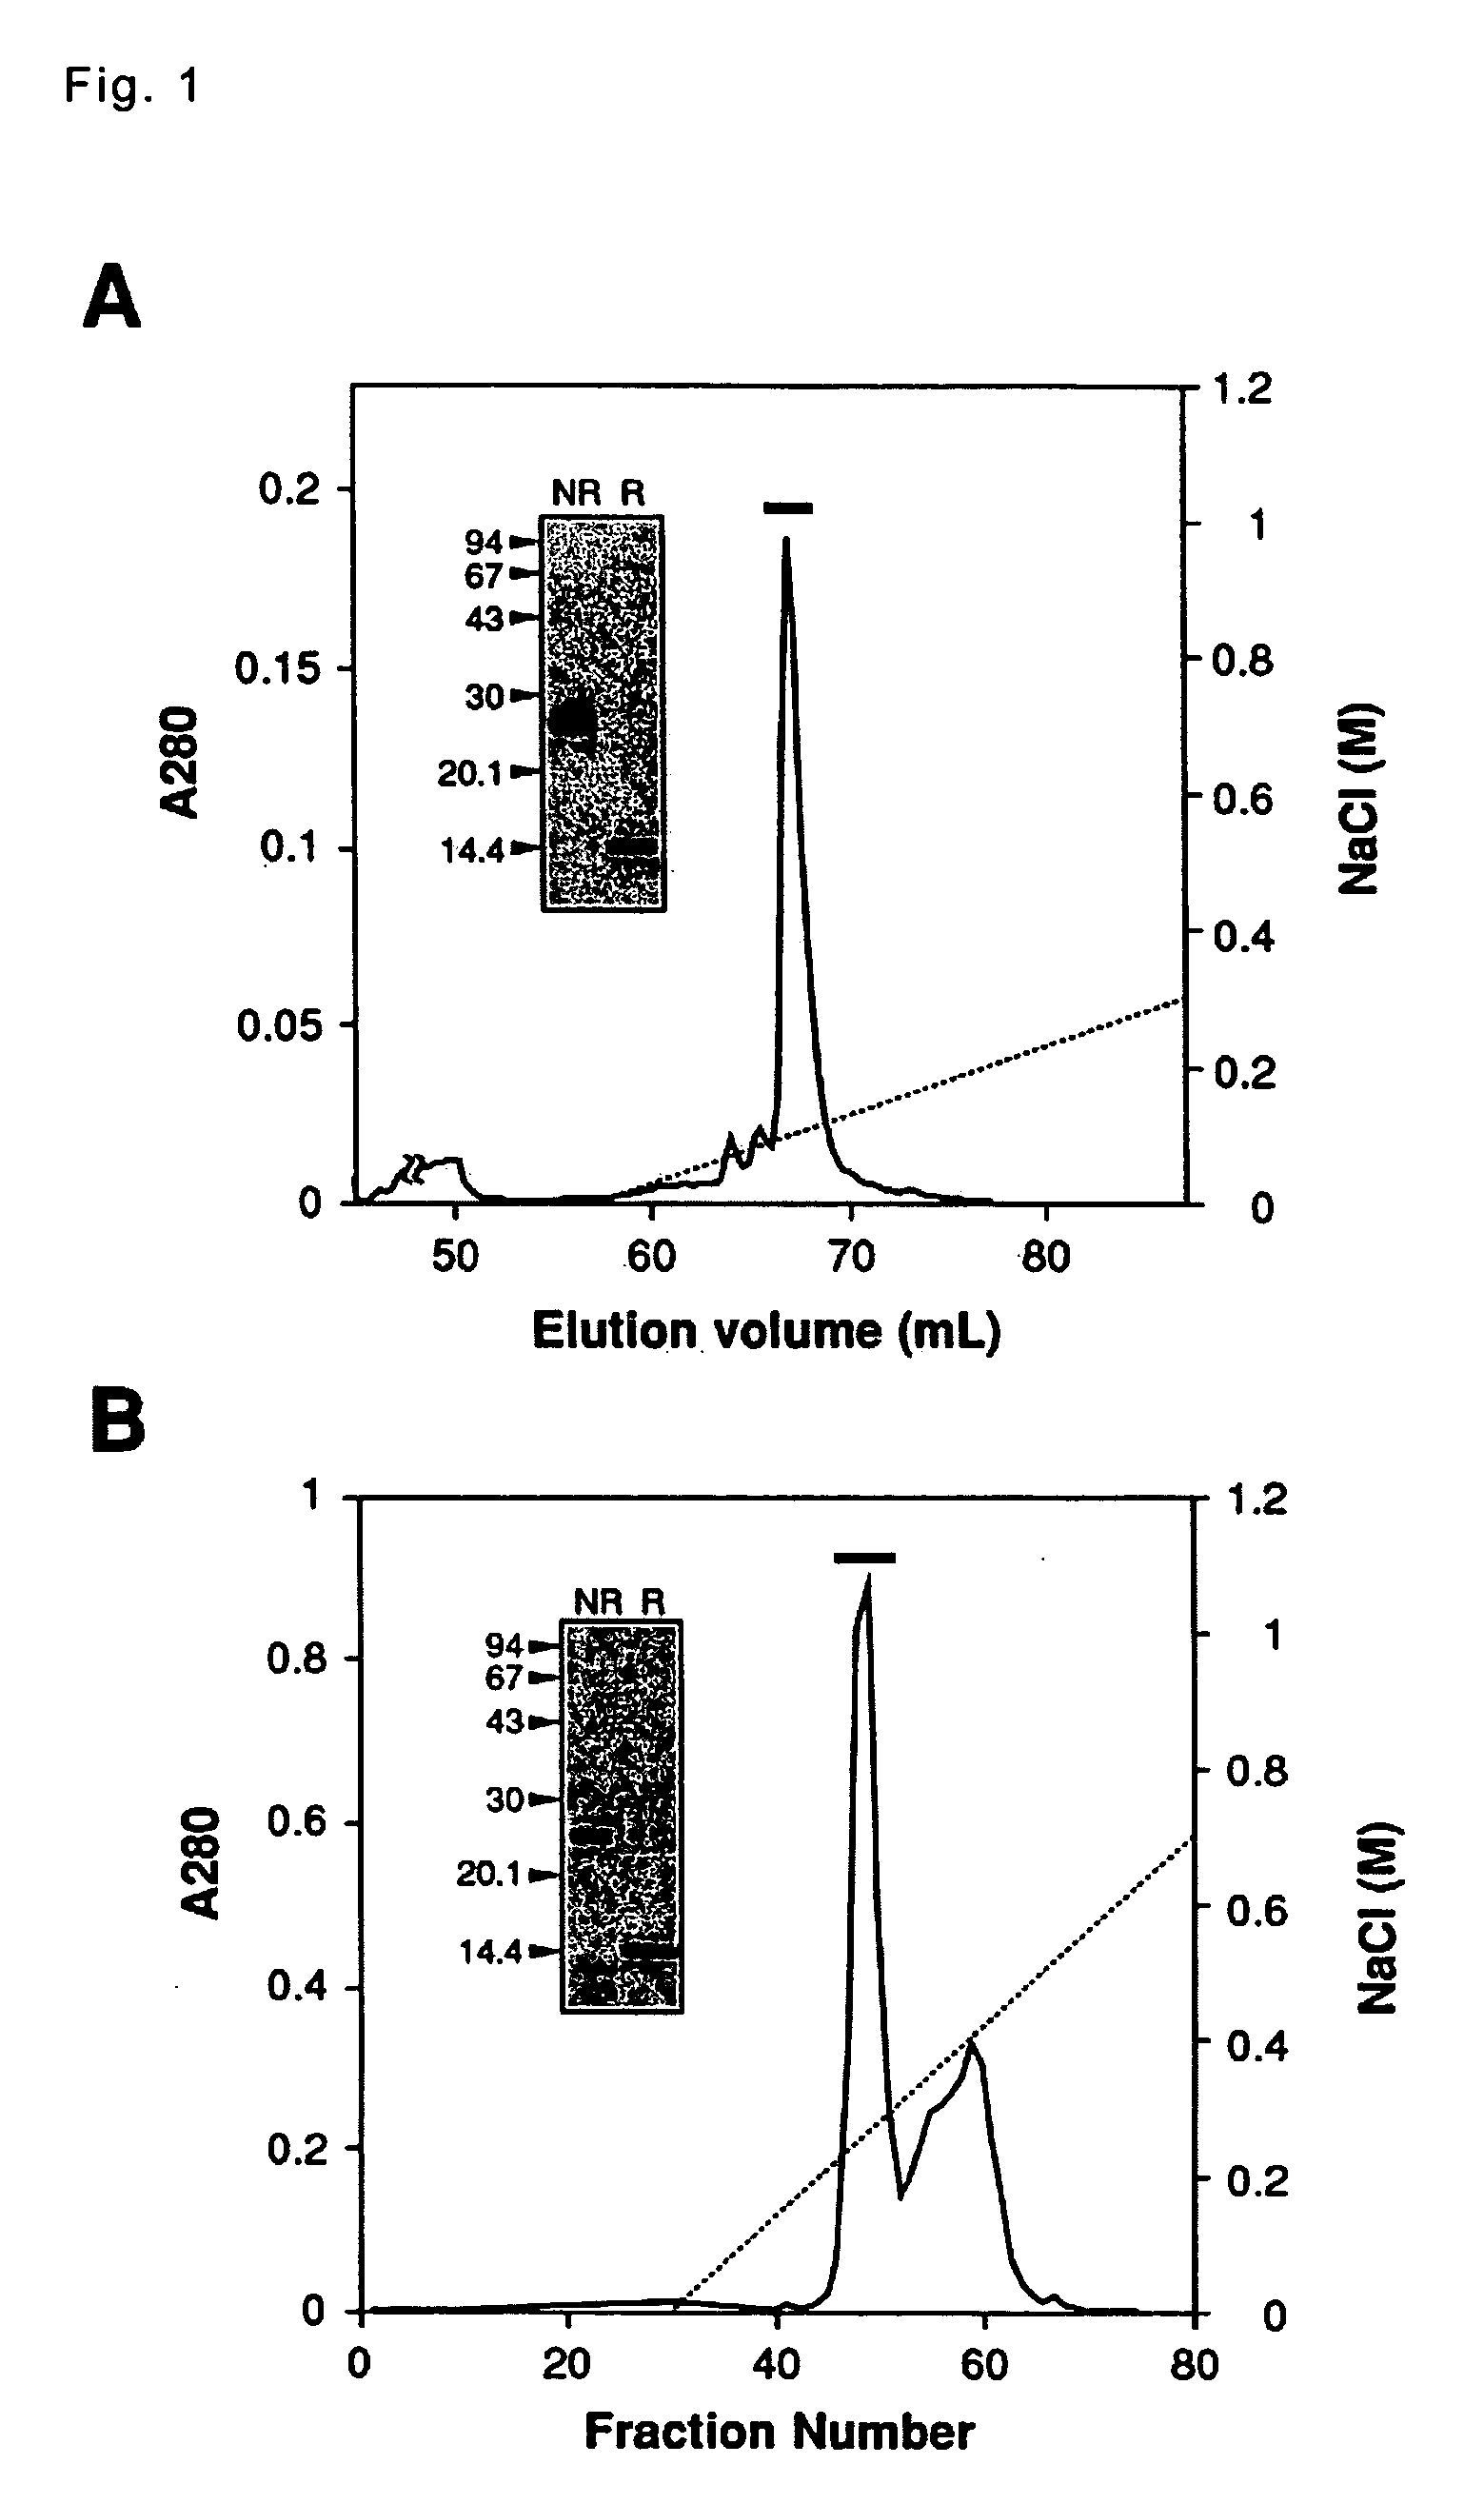 Venom-derived vascular endothelial growth factor-like protein having binding activity specific to vascular endothelial growth factor receptor type 2 and use thereof